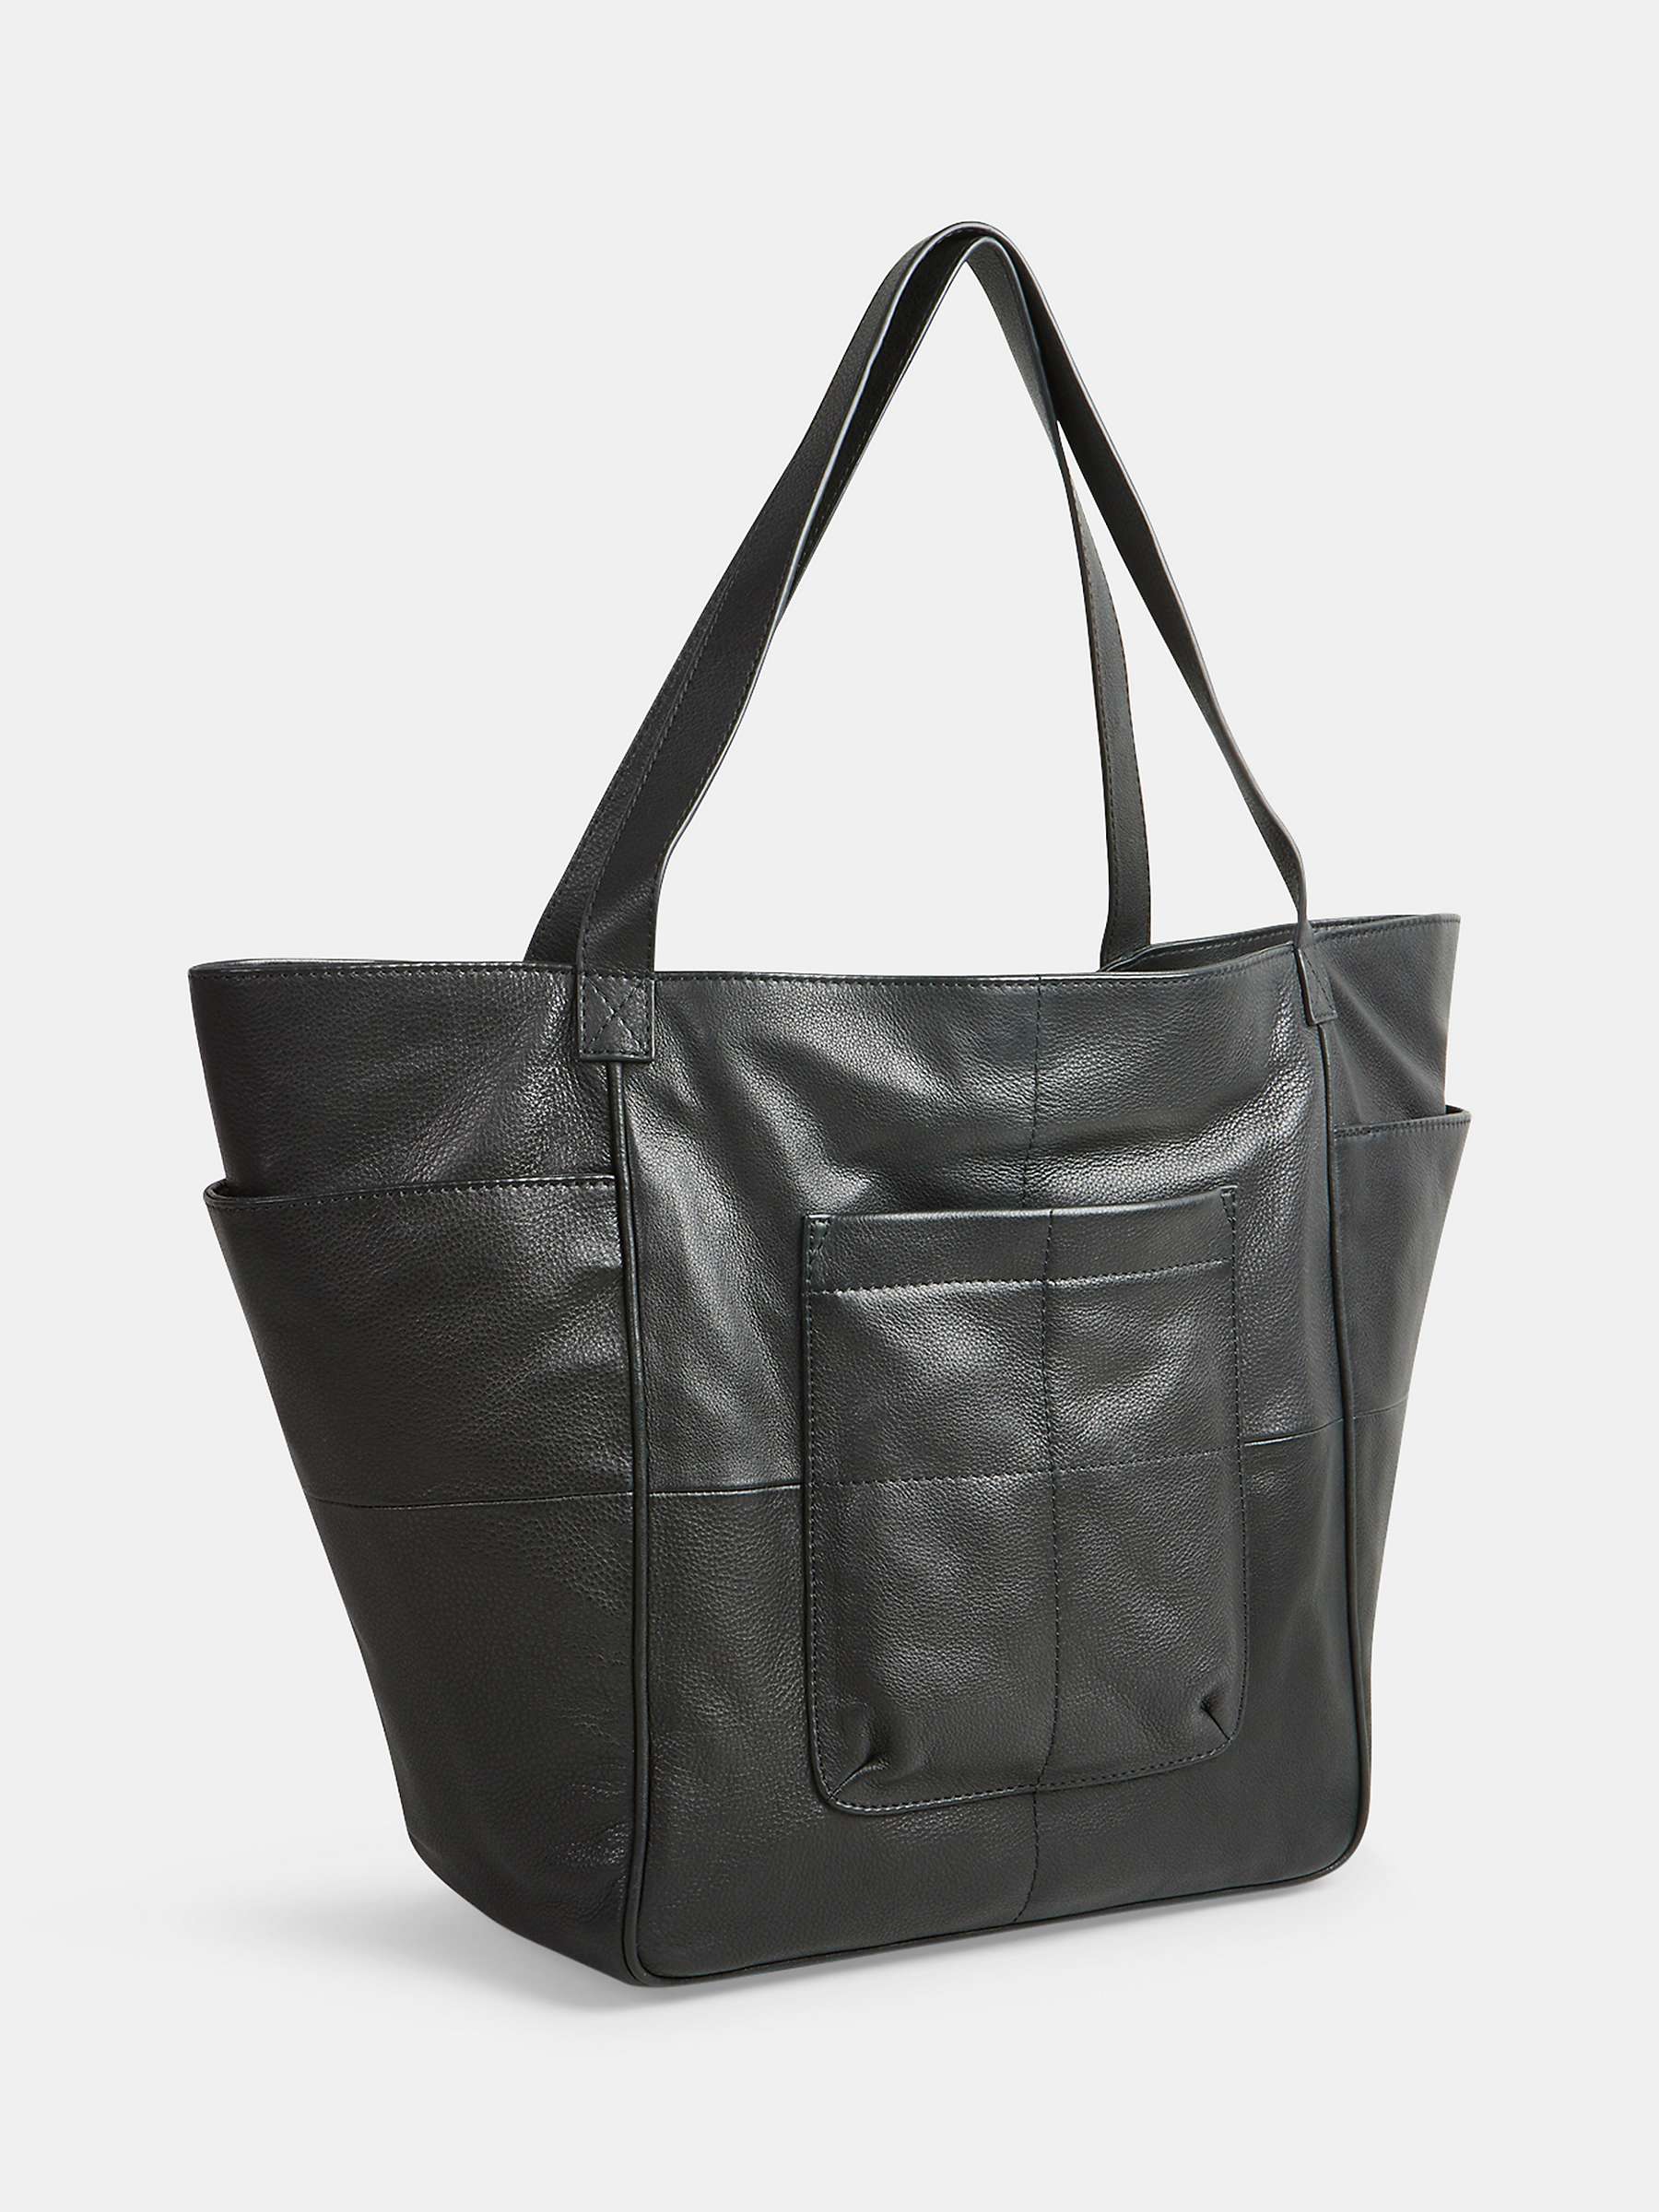 Buy HUSH Mariana Leather Tote Bag Online at johnlewis.com